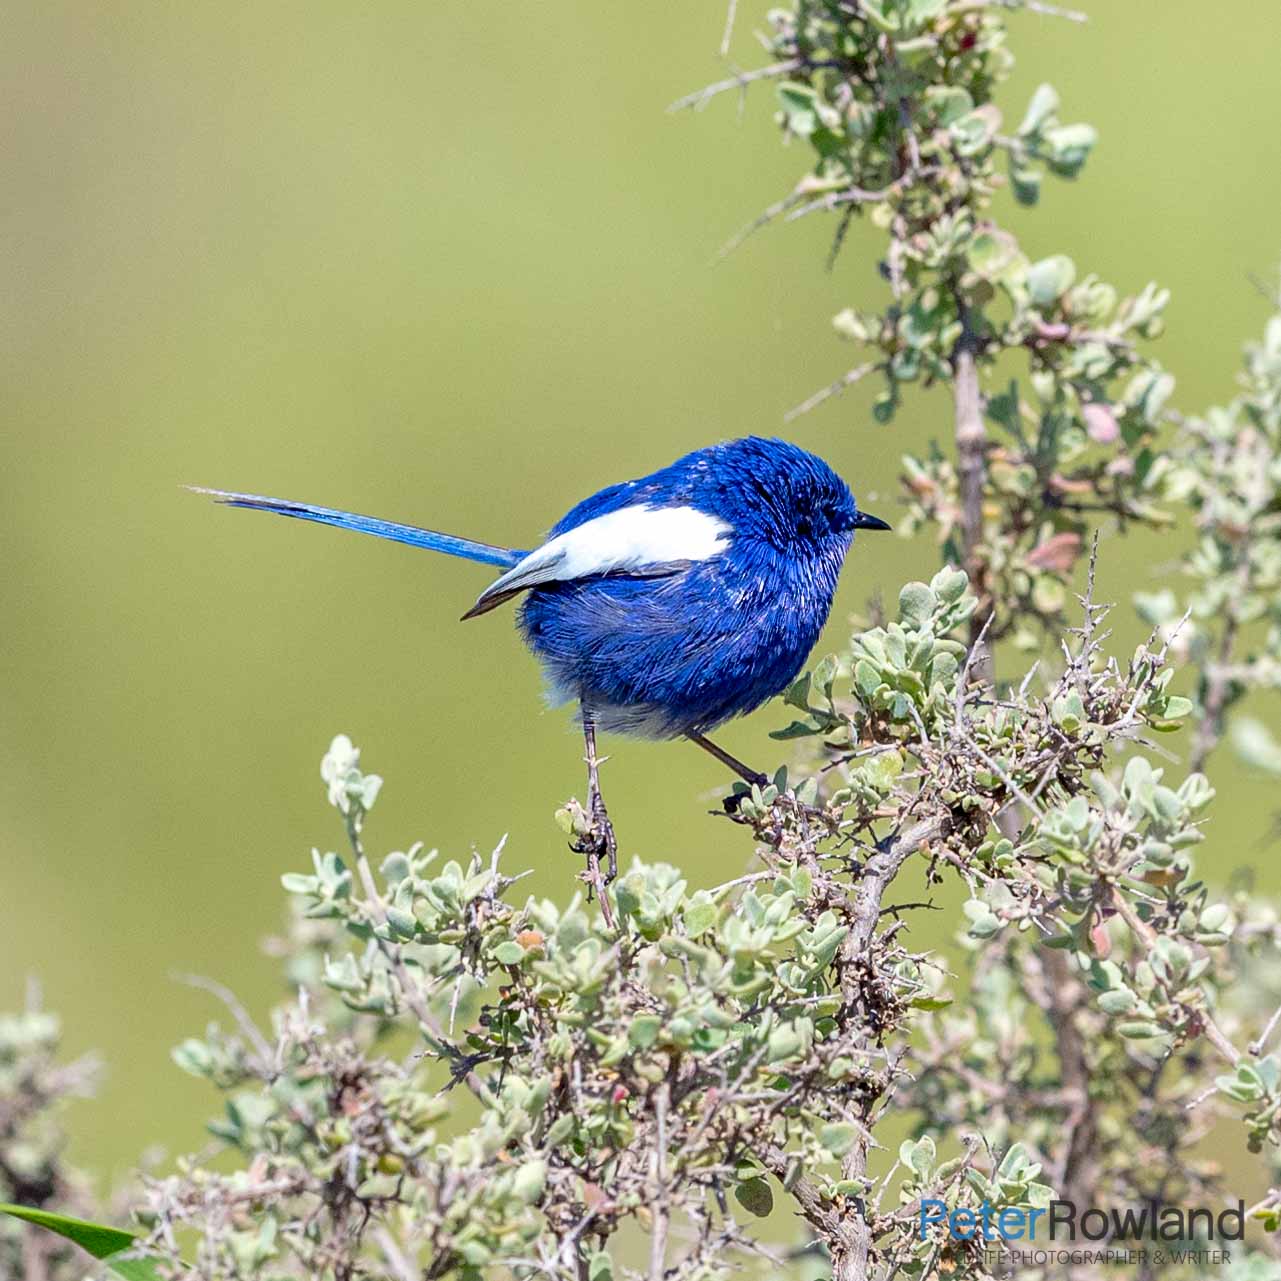 A male White-winged Fairywren perches at the top of a thorny bush